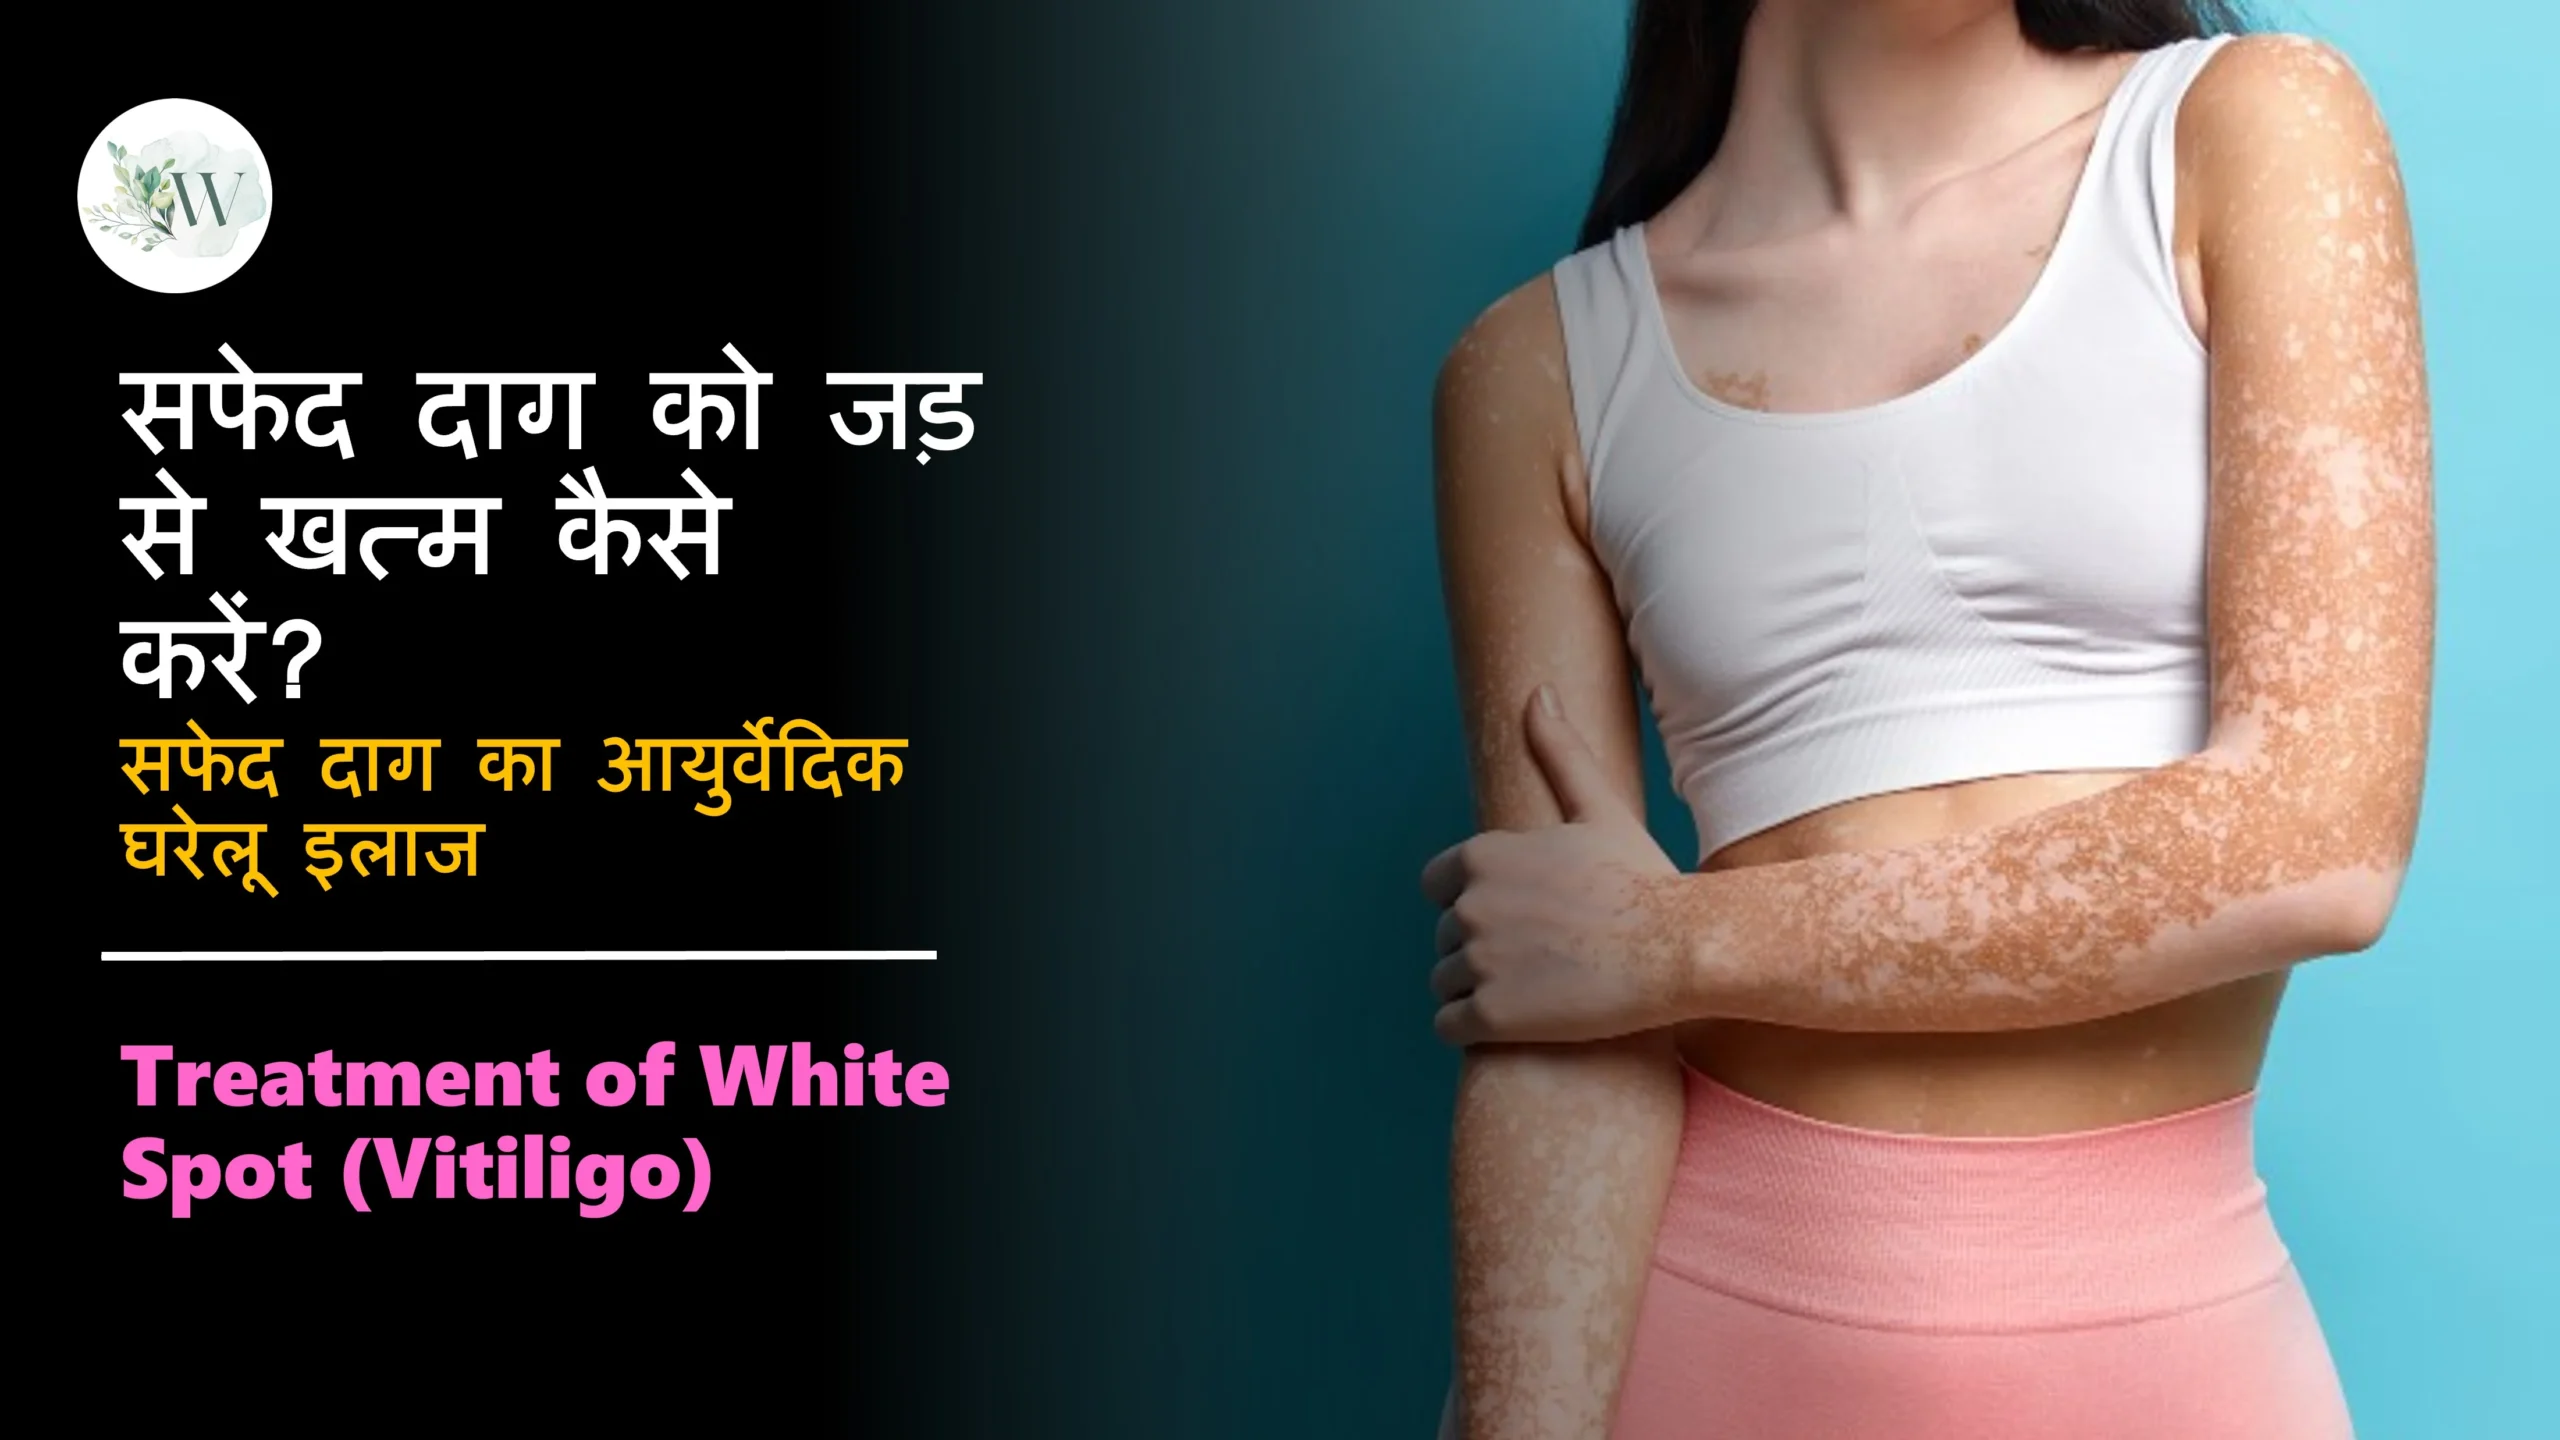 How to Treat White Spot in Hindi